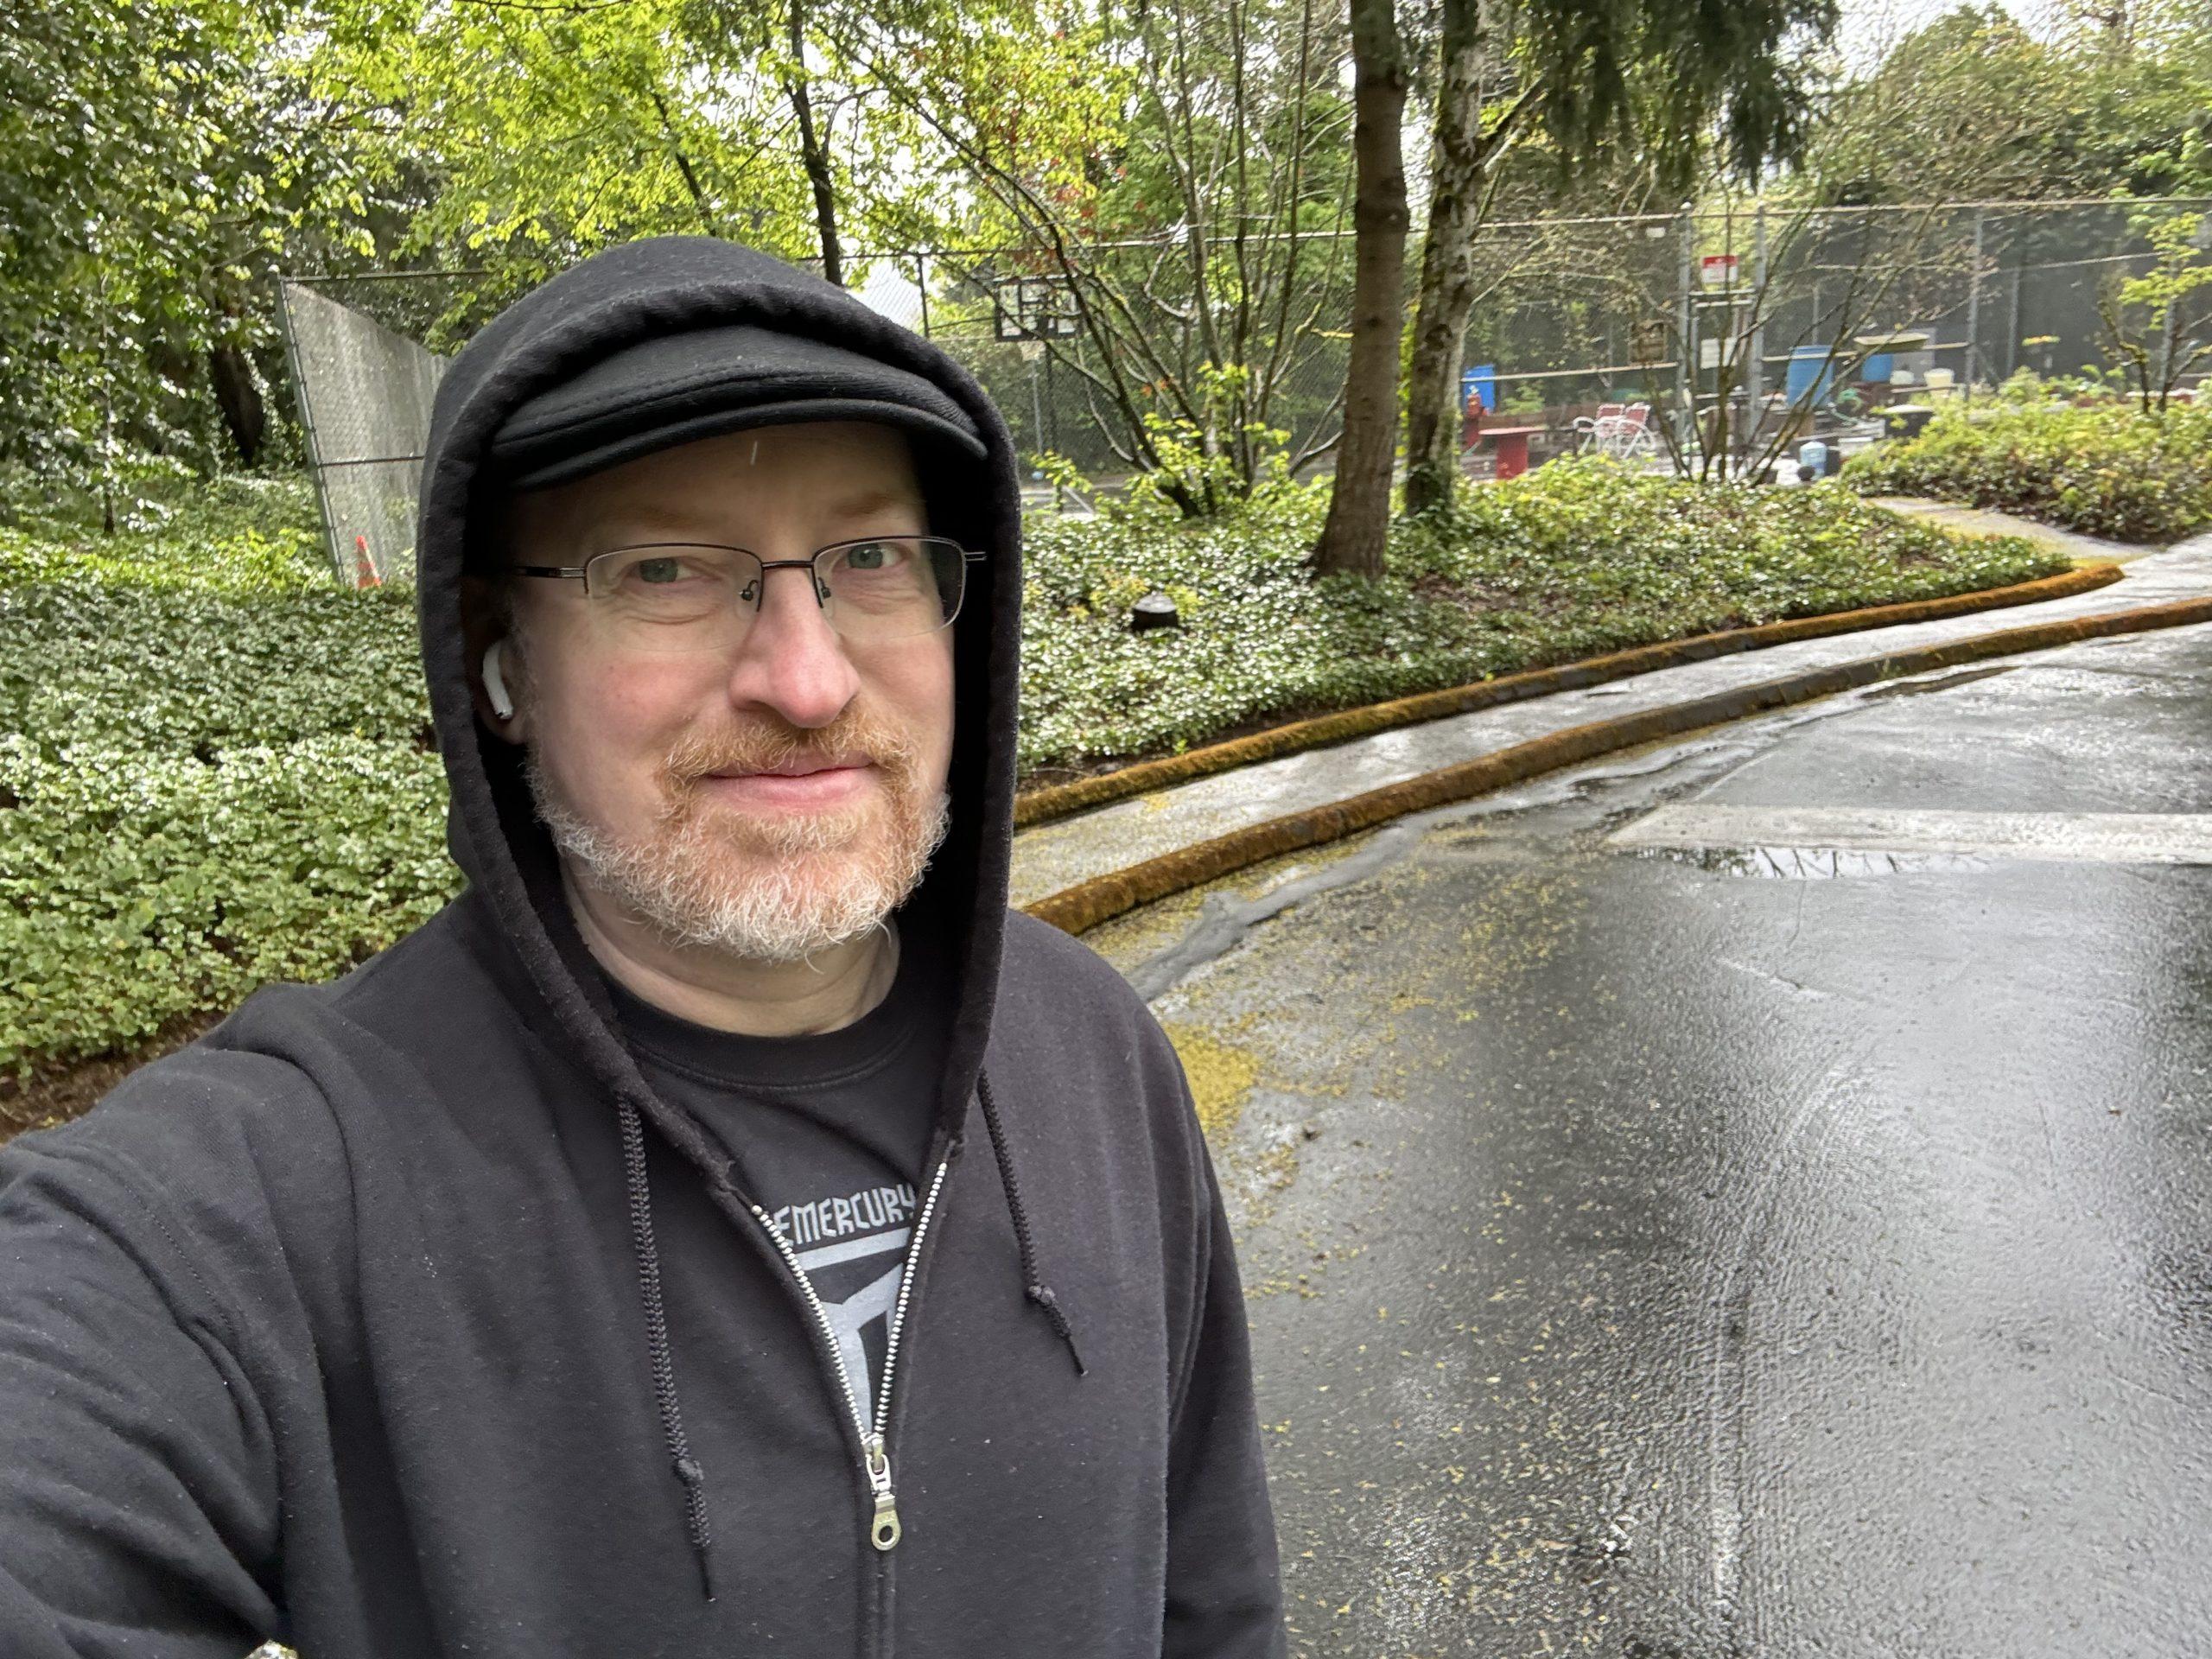 Me, wearing hat and hoodie zipped up and with the hood pulled up over my head, outside on wet pavement in front of green bushes and trees by a fenced-in tennis court.